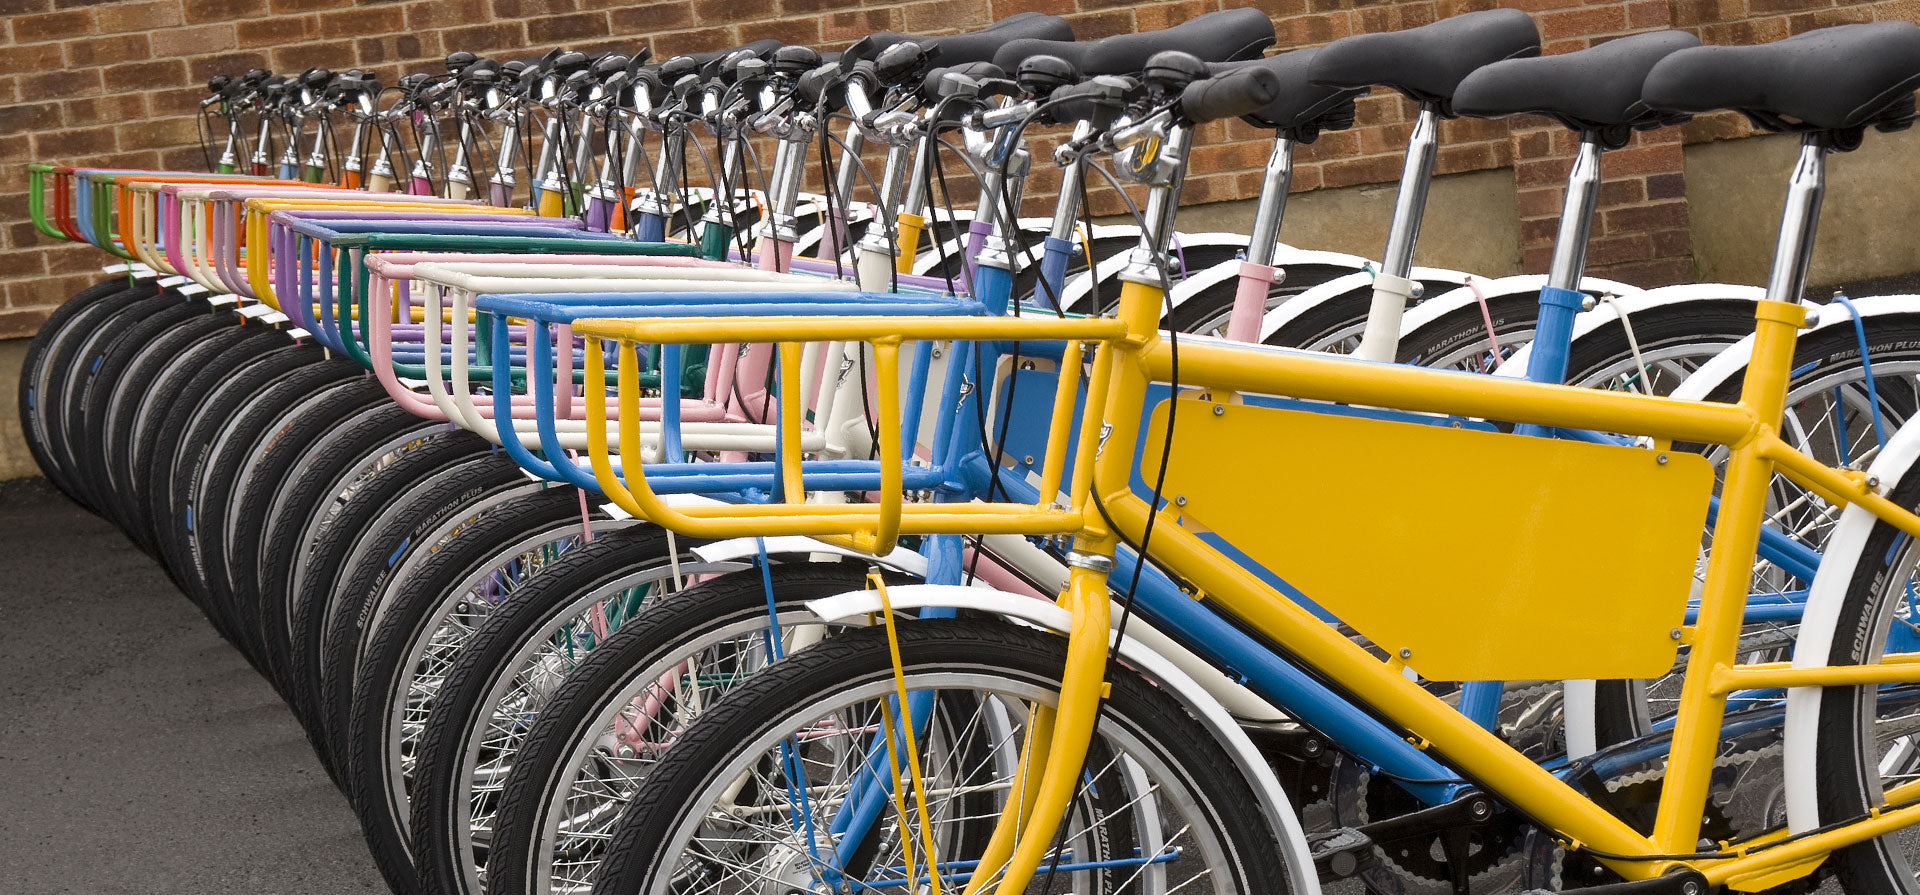 A close-up of a row of brightly multi-coloured Pashley cargo bikes with advertising boards.